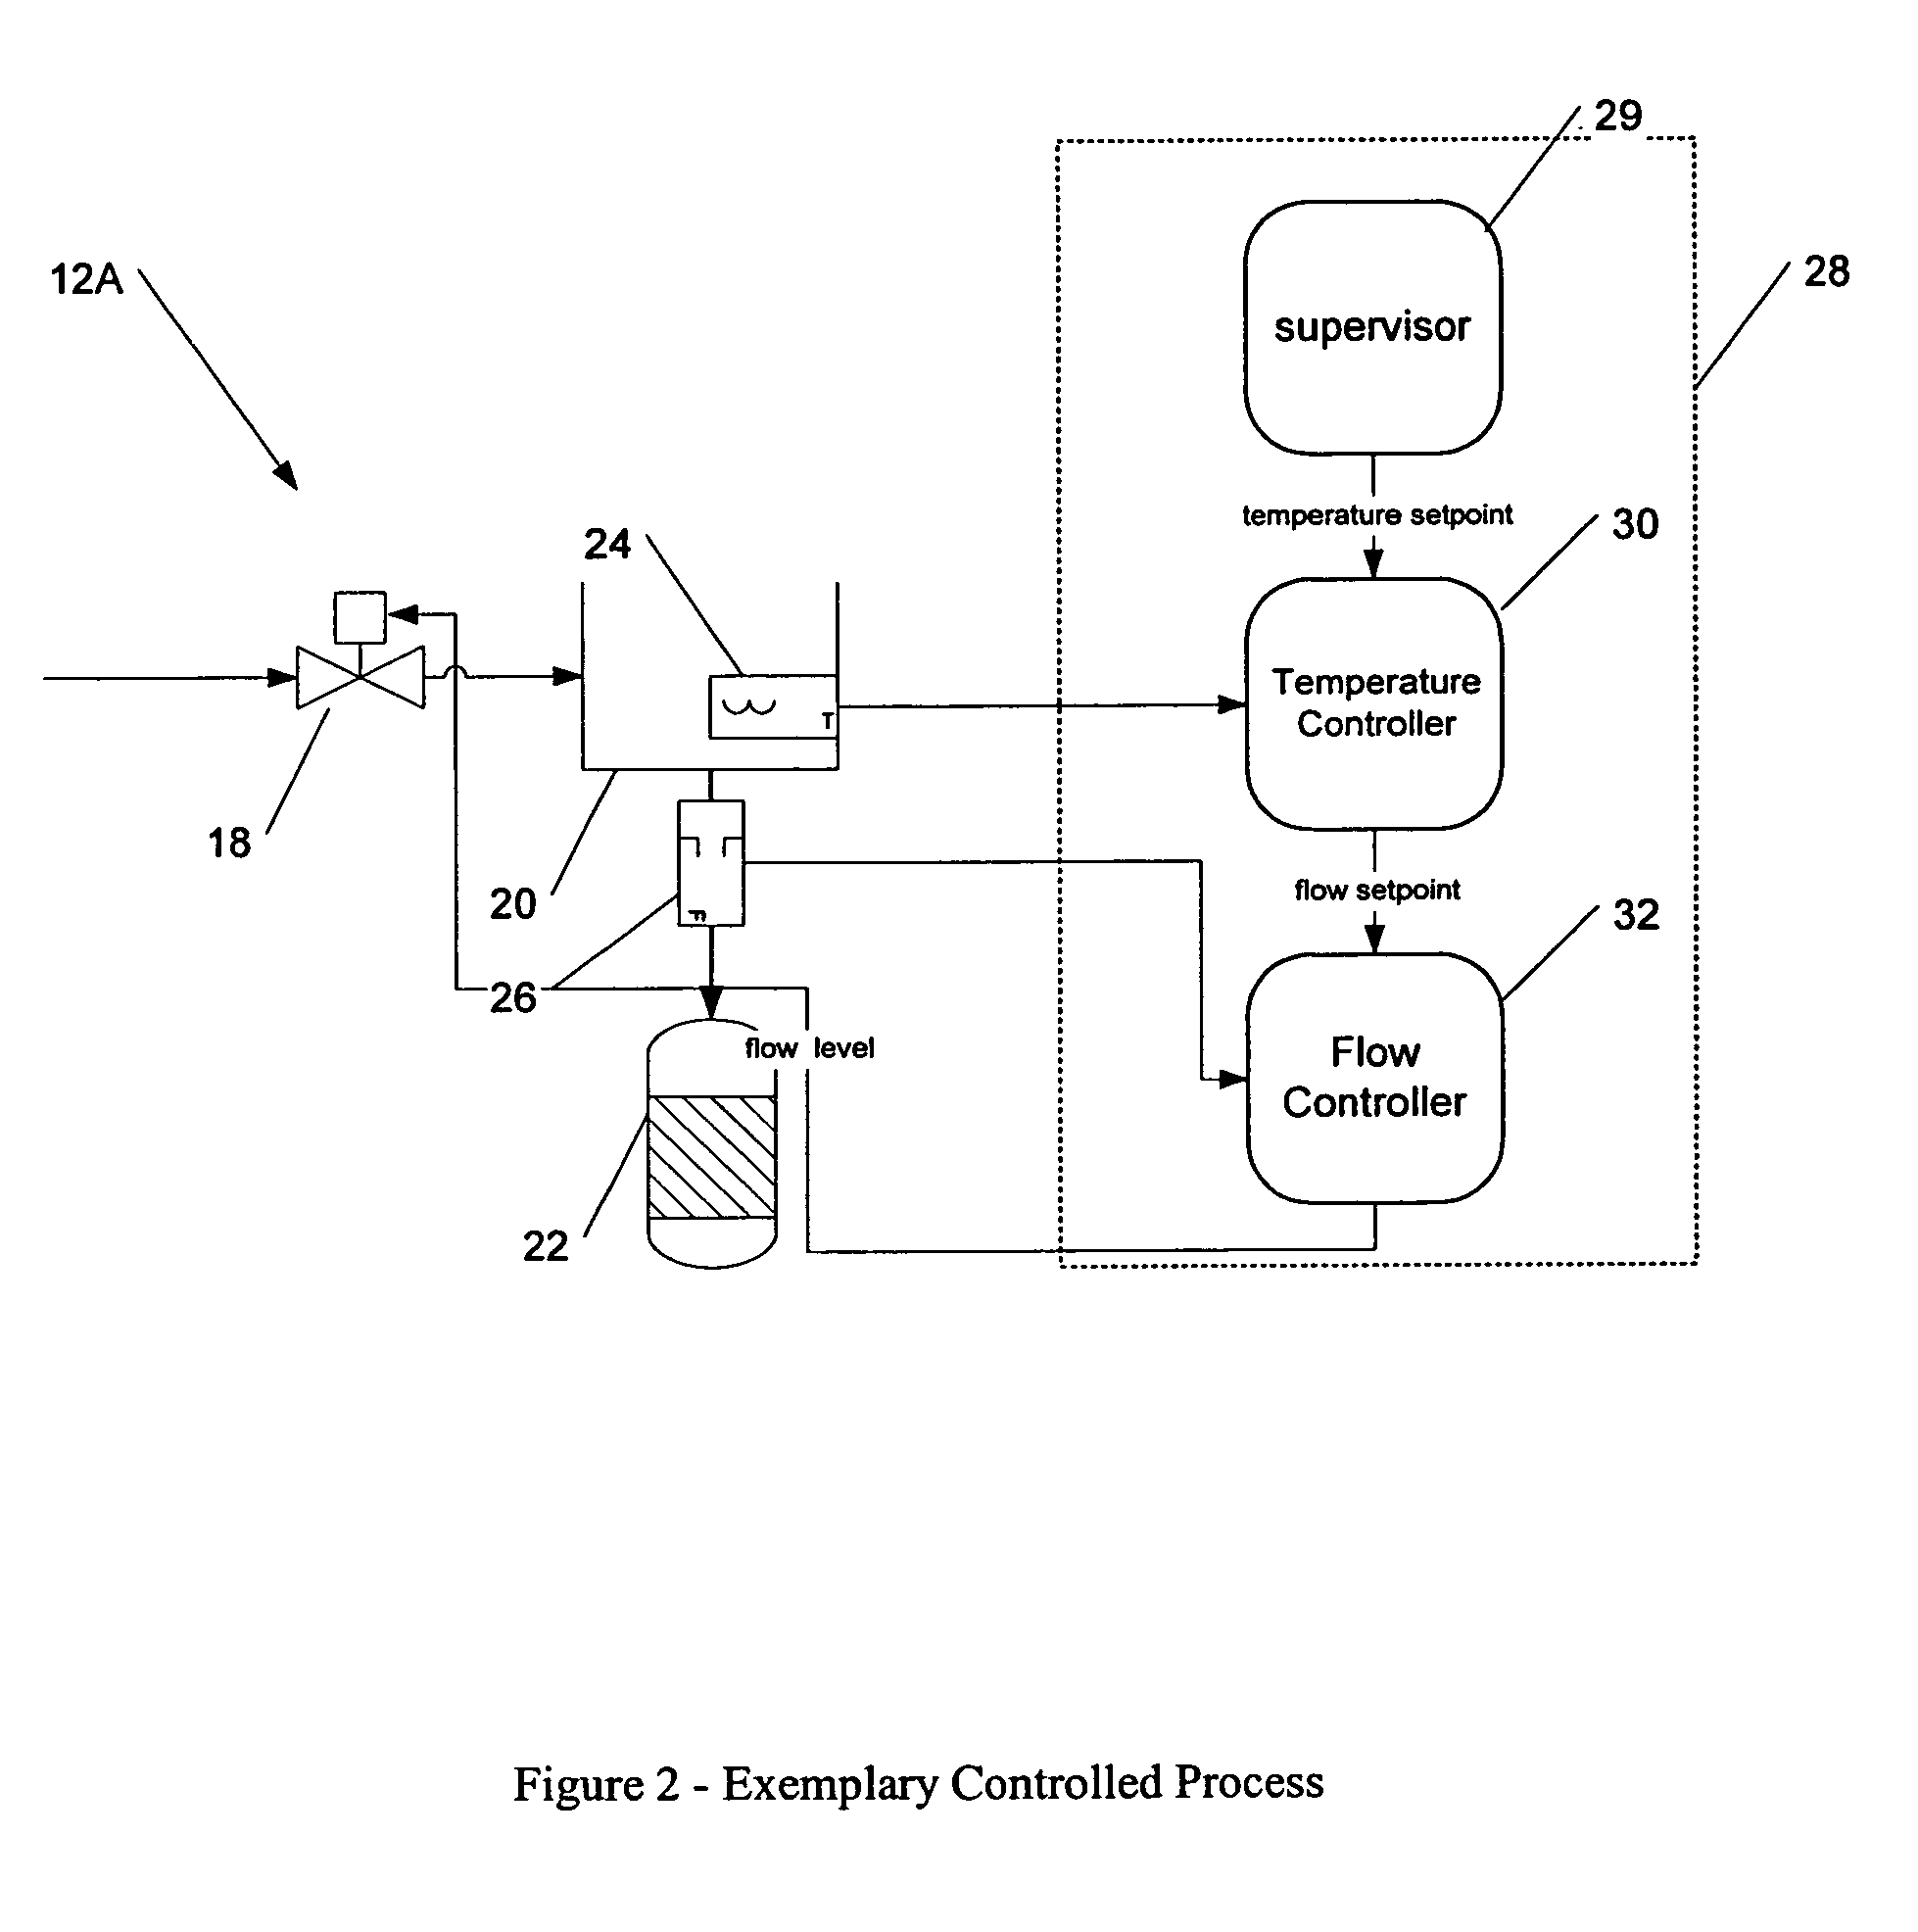 Methods and apparatus for control configuration with versioning, security, composite blocks, edit selection, object swapping, formulaic values and other aspects